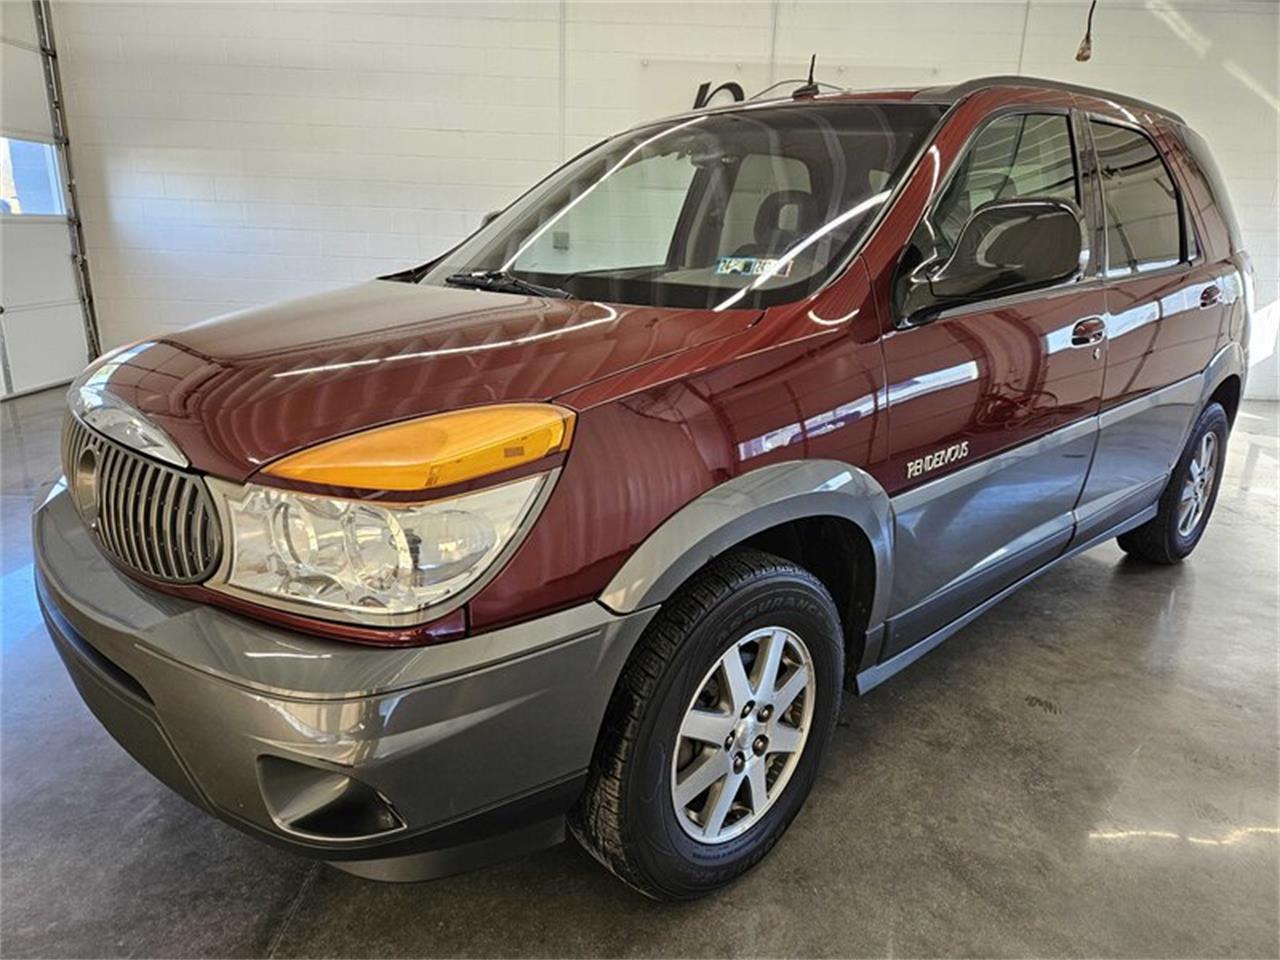 For Sale: 2003 Buick Rendezvous in Spring City, Pennsylvania for sale in Spring City, PA